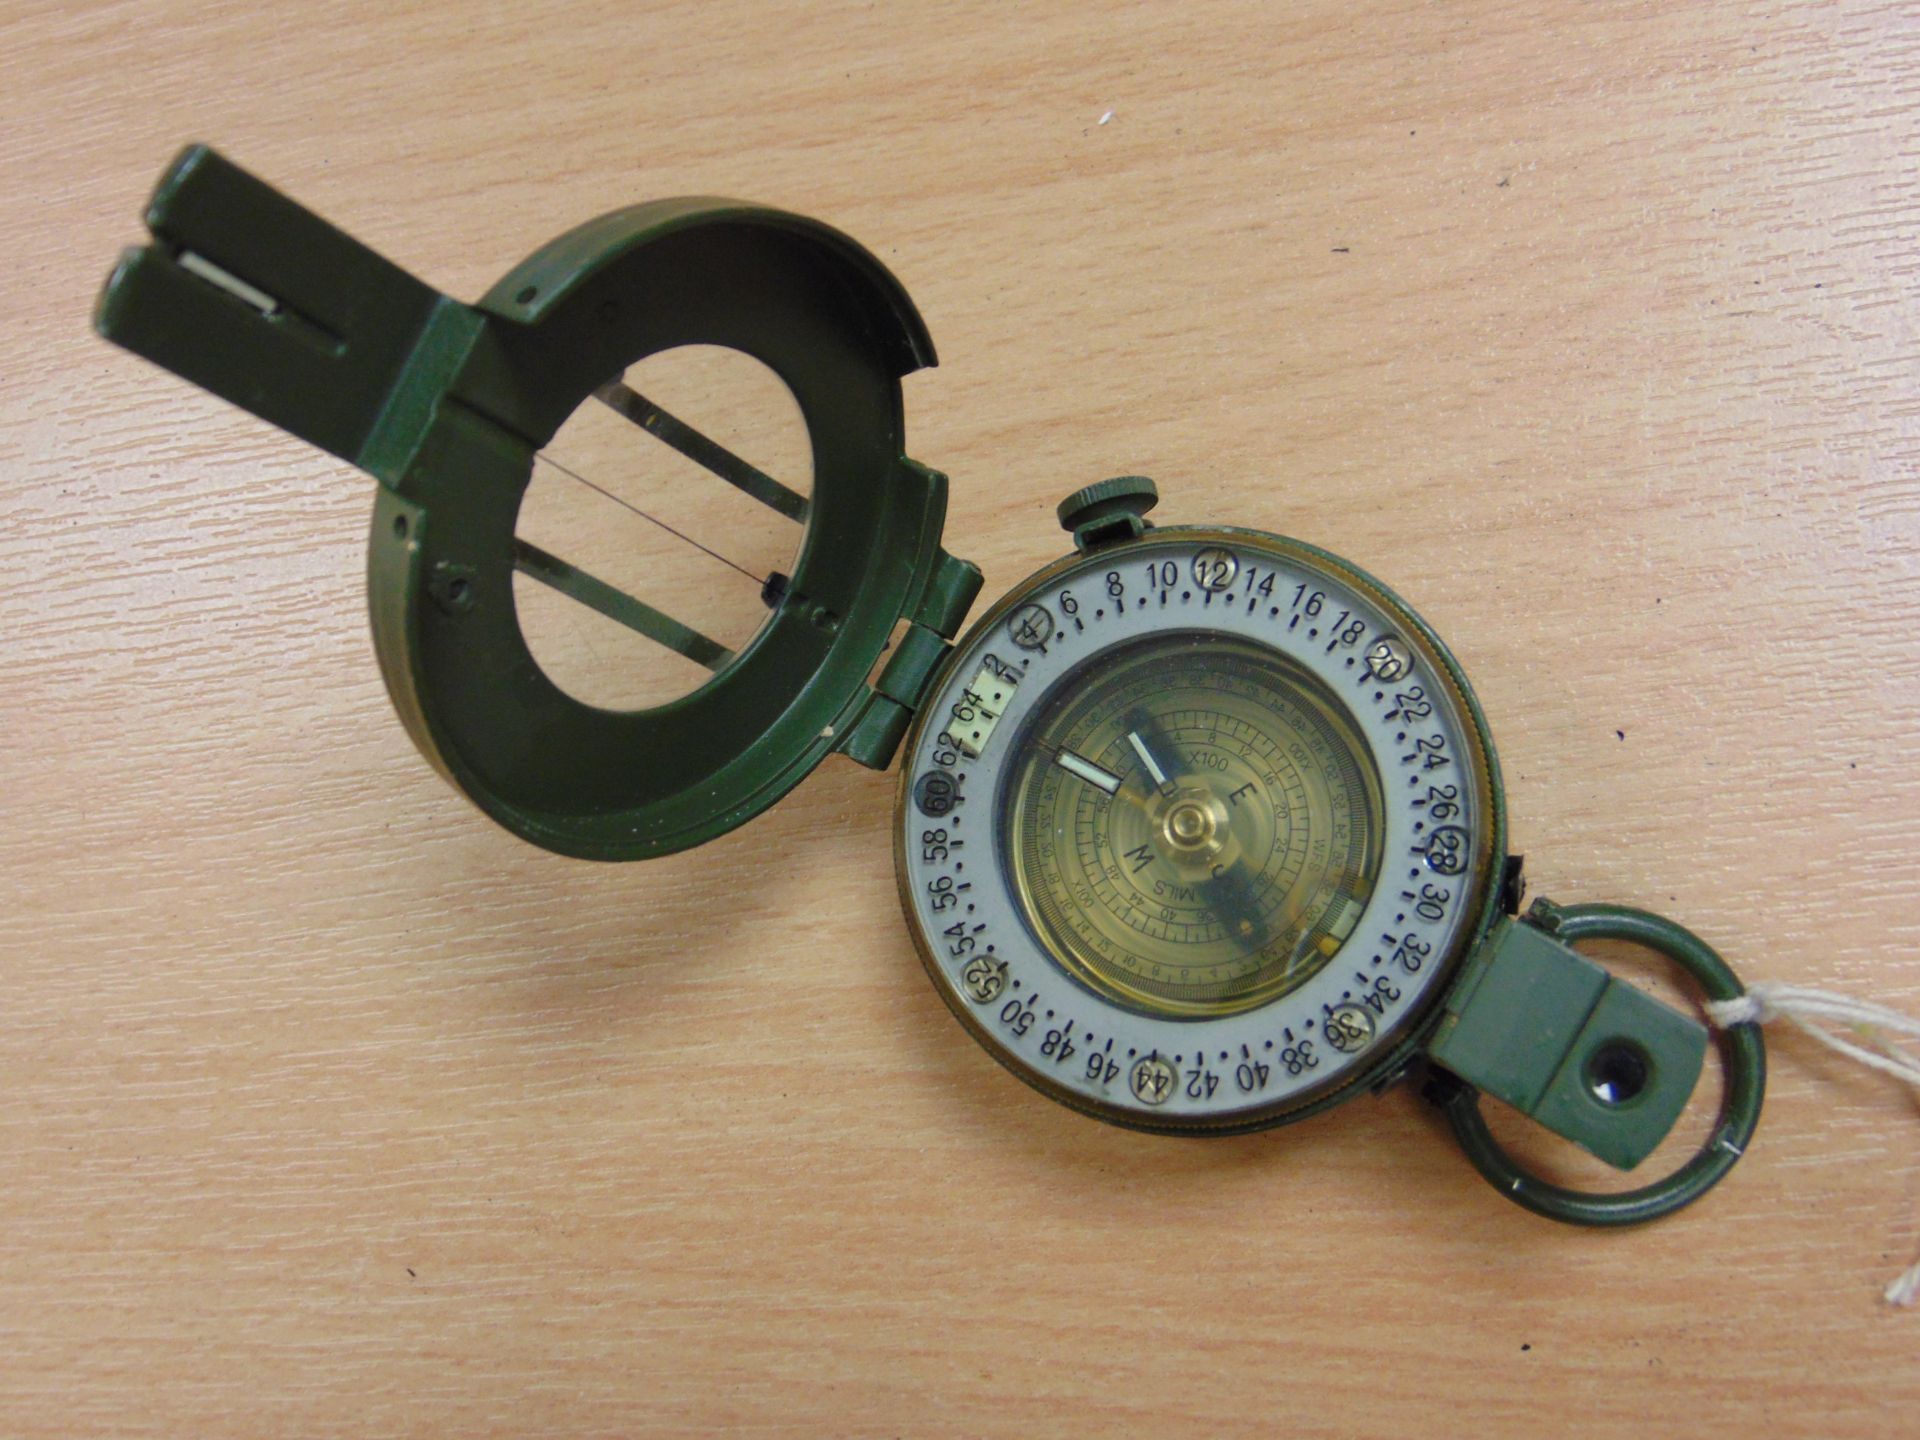 STANLEY- LONDON BRITISH ARMY PRISMATIC COMPASS WITH NATO MARKINGS AND CALIBRATED IN MILS UNISSUED - Image 2 of 5